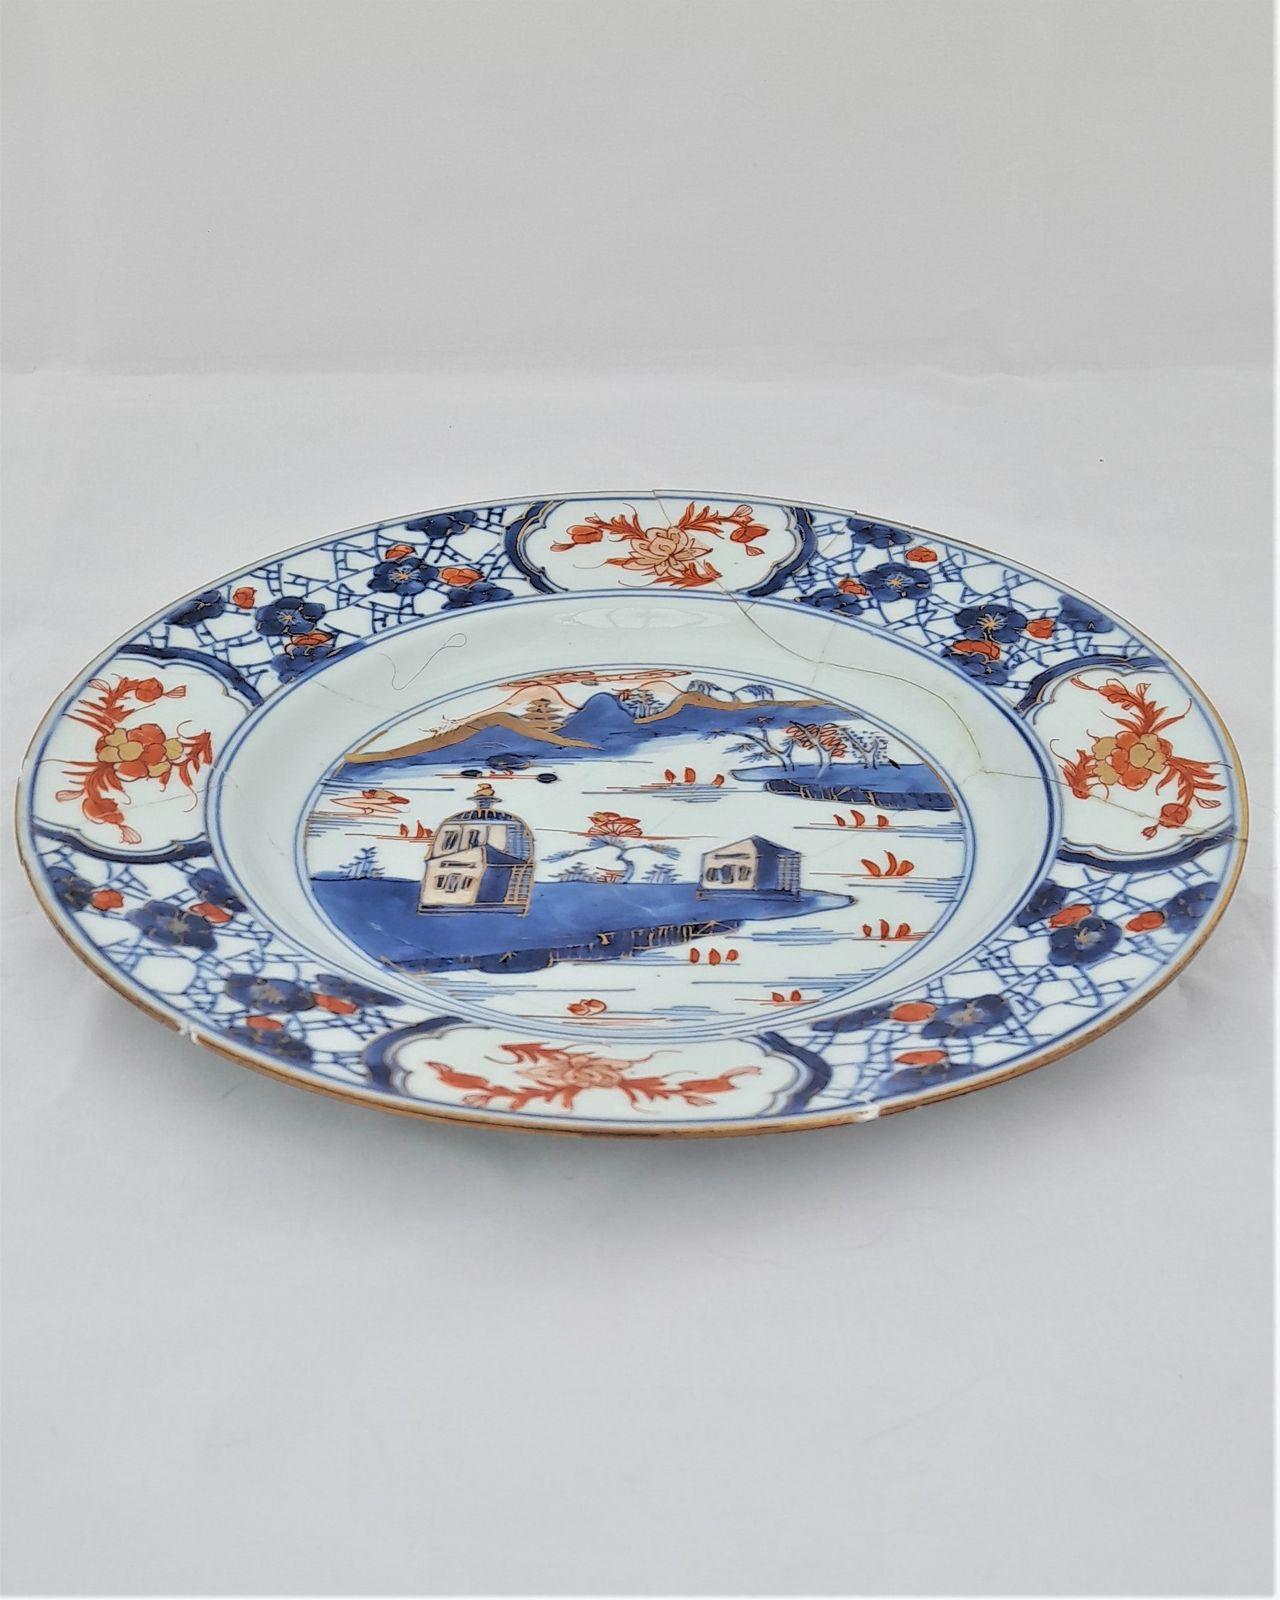 An antique Chinese Kangxi Porcelain Plate Painted European Style Buildings circa 1720 As found  twelve pieces glued back together.